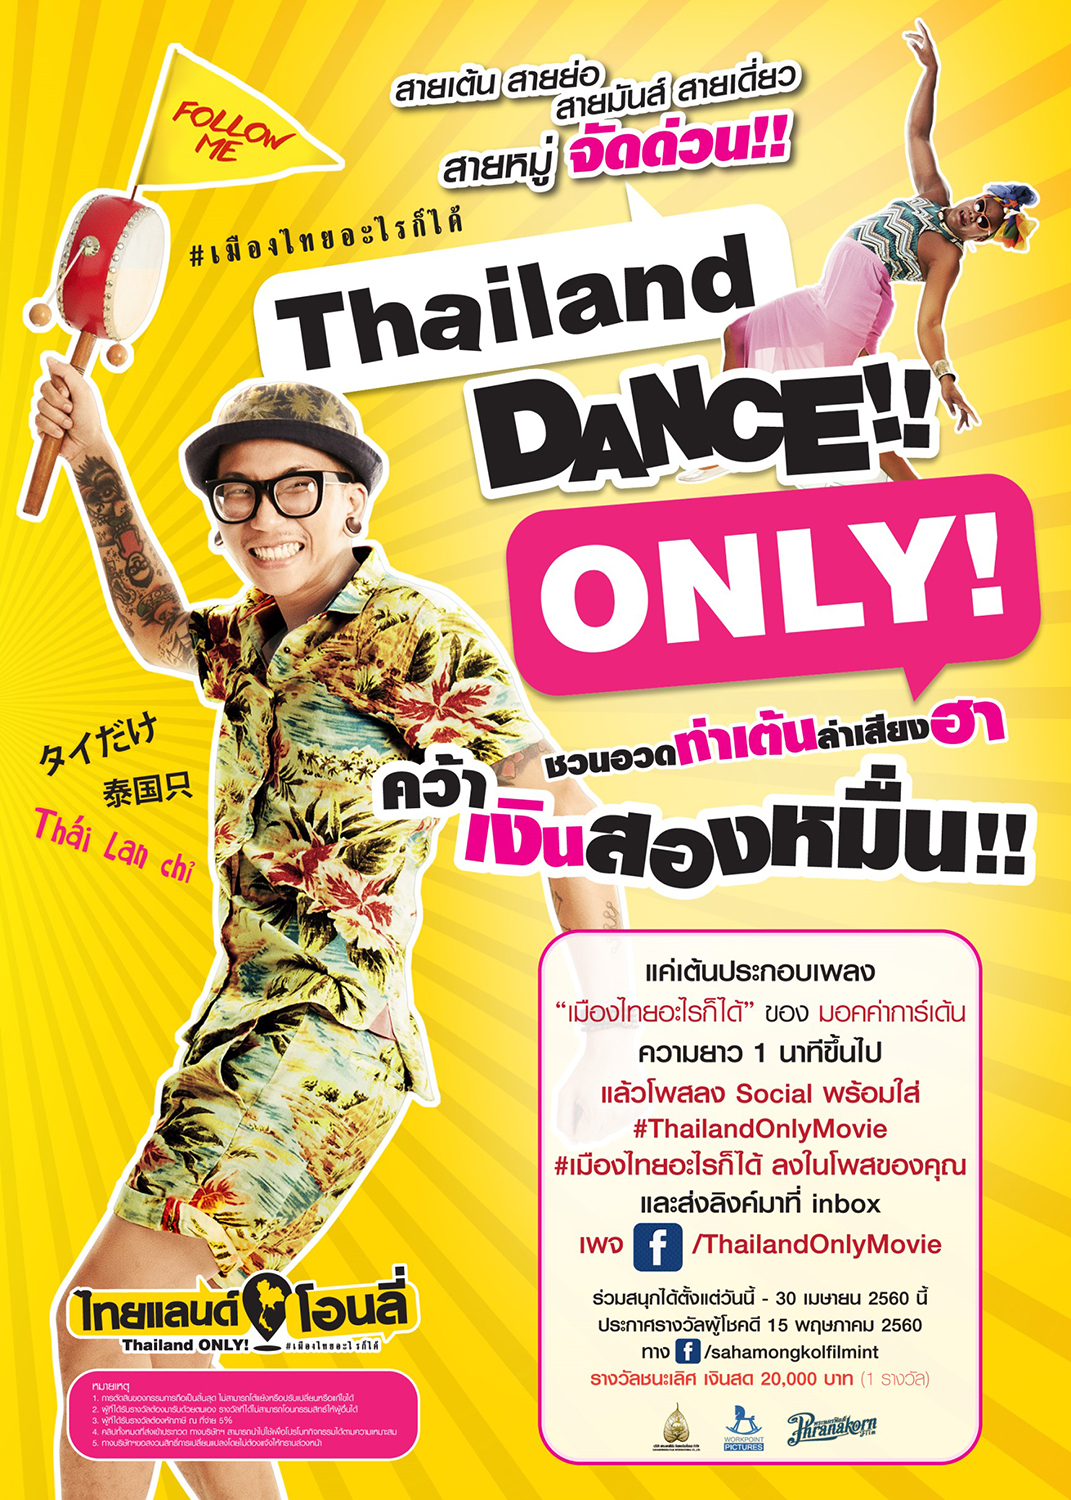 Thailand-Dance-Only-Poster